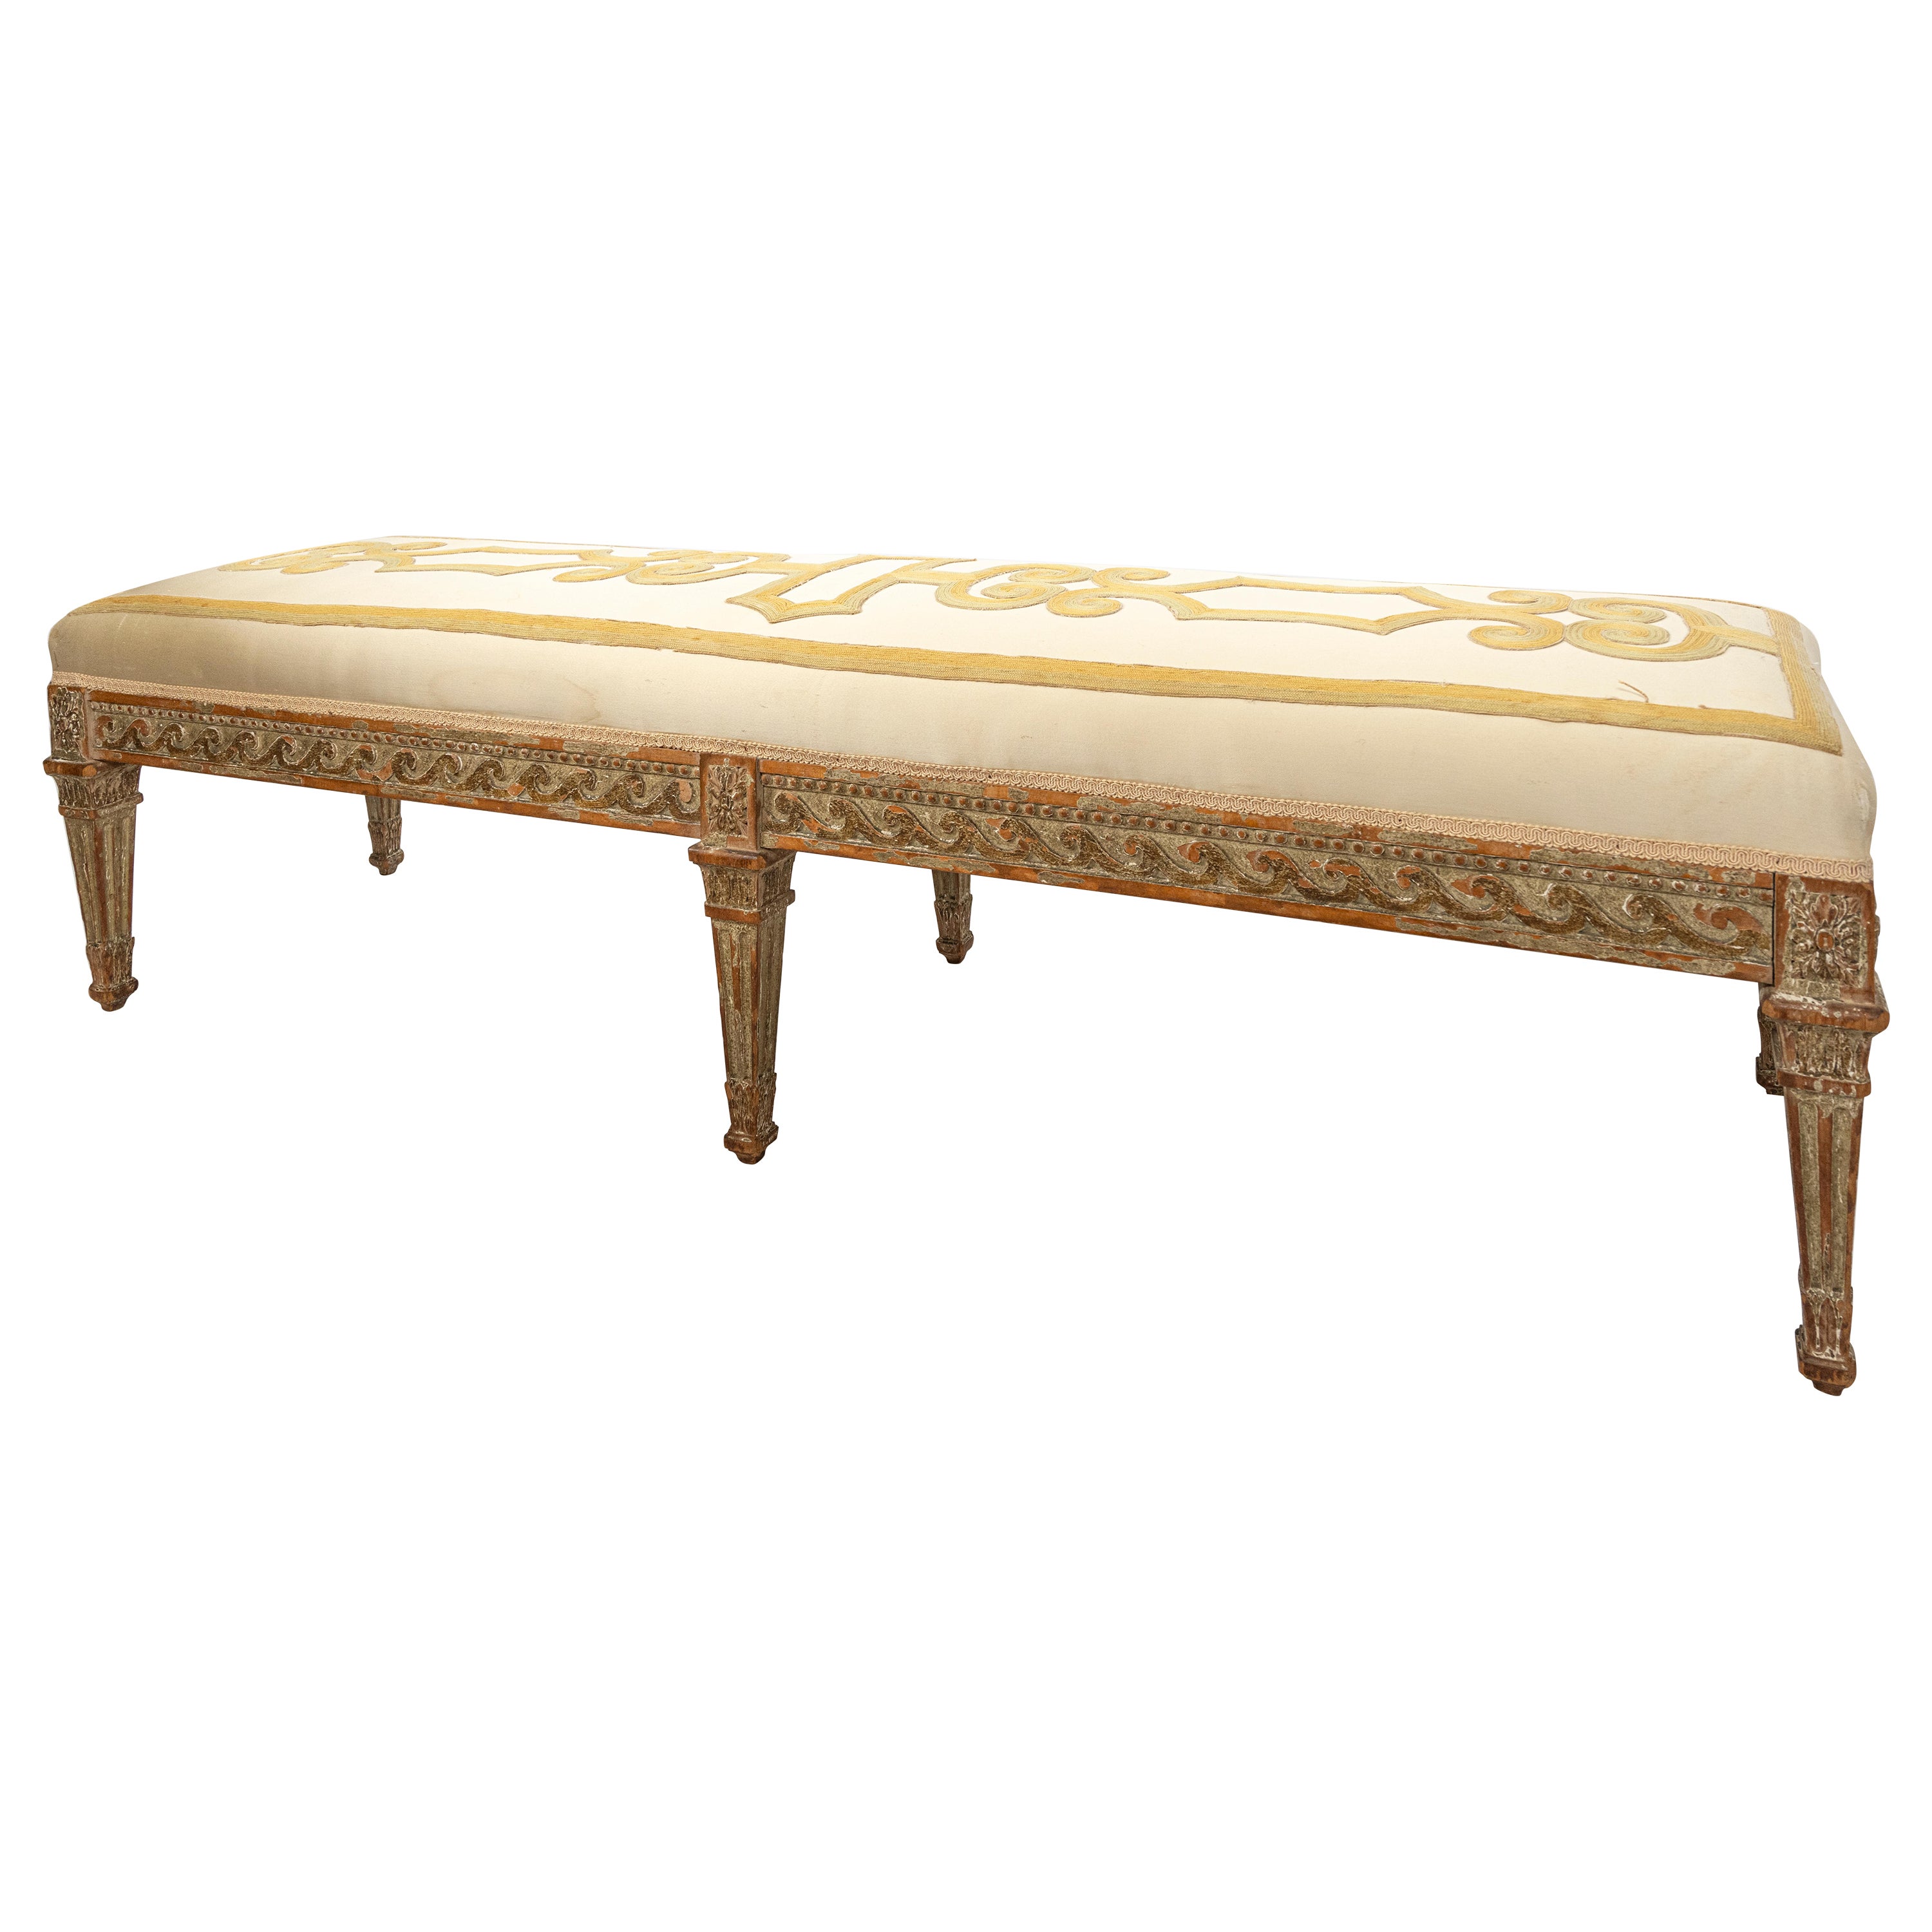 Italian Neoclassical-Style Painted Wood Bench For Sale